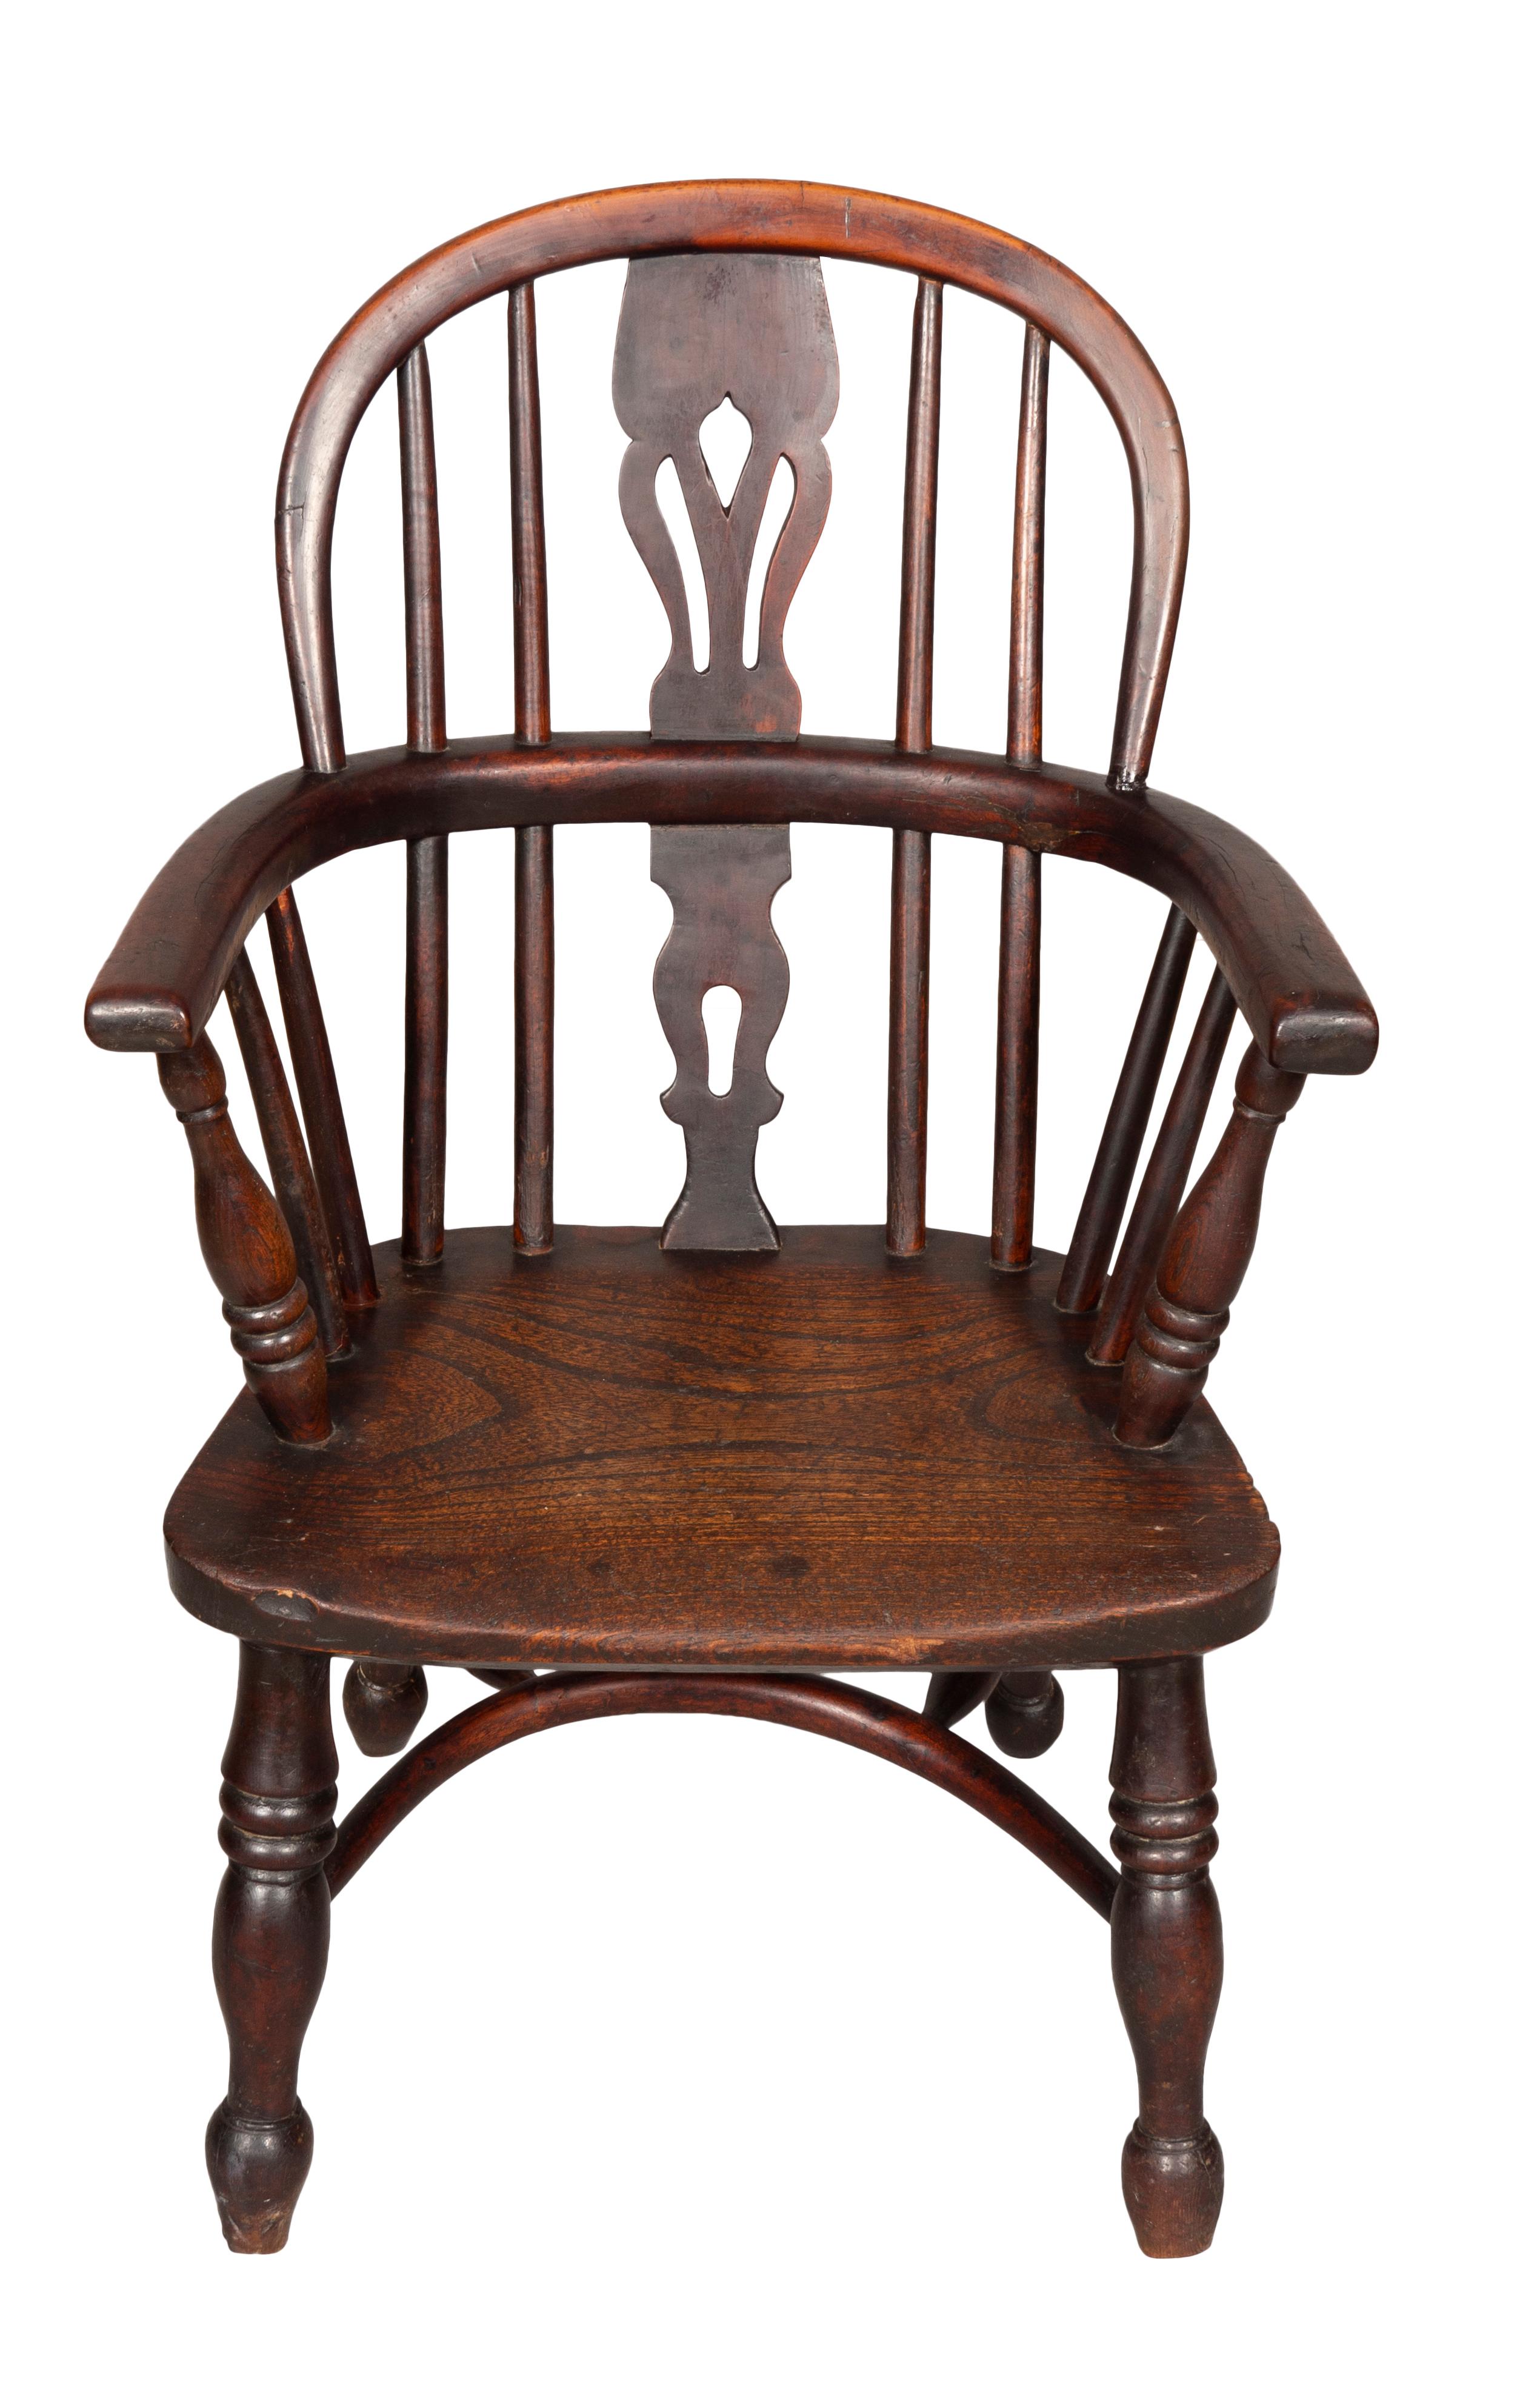 Typical form with bow back and pierced baluster splat, turned legs and crinoline stretcher.